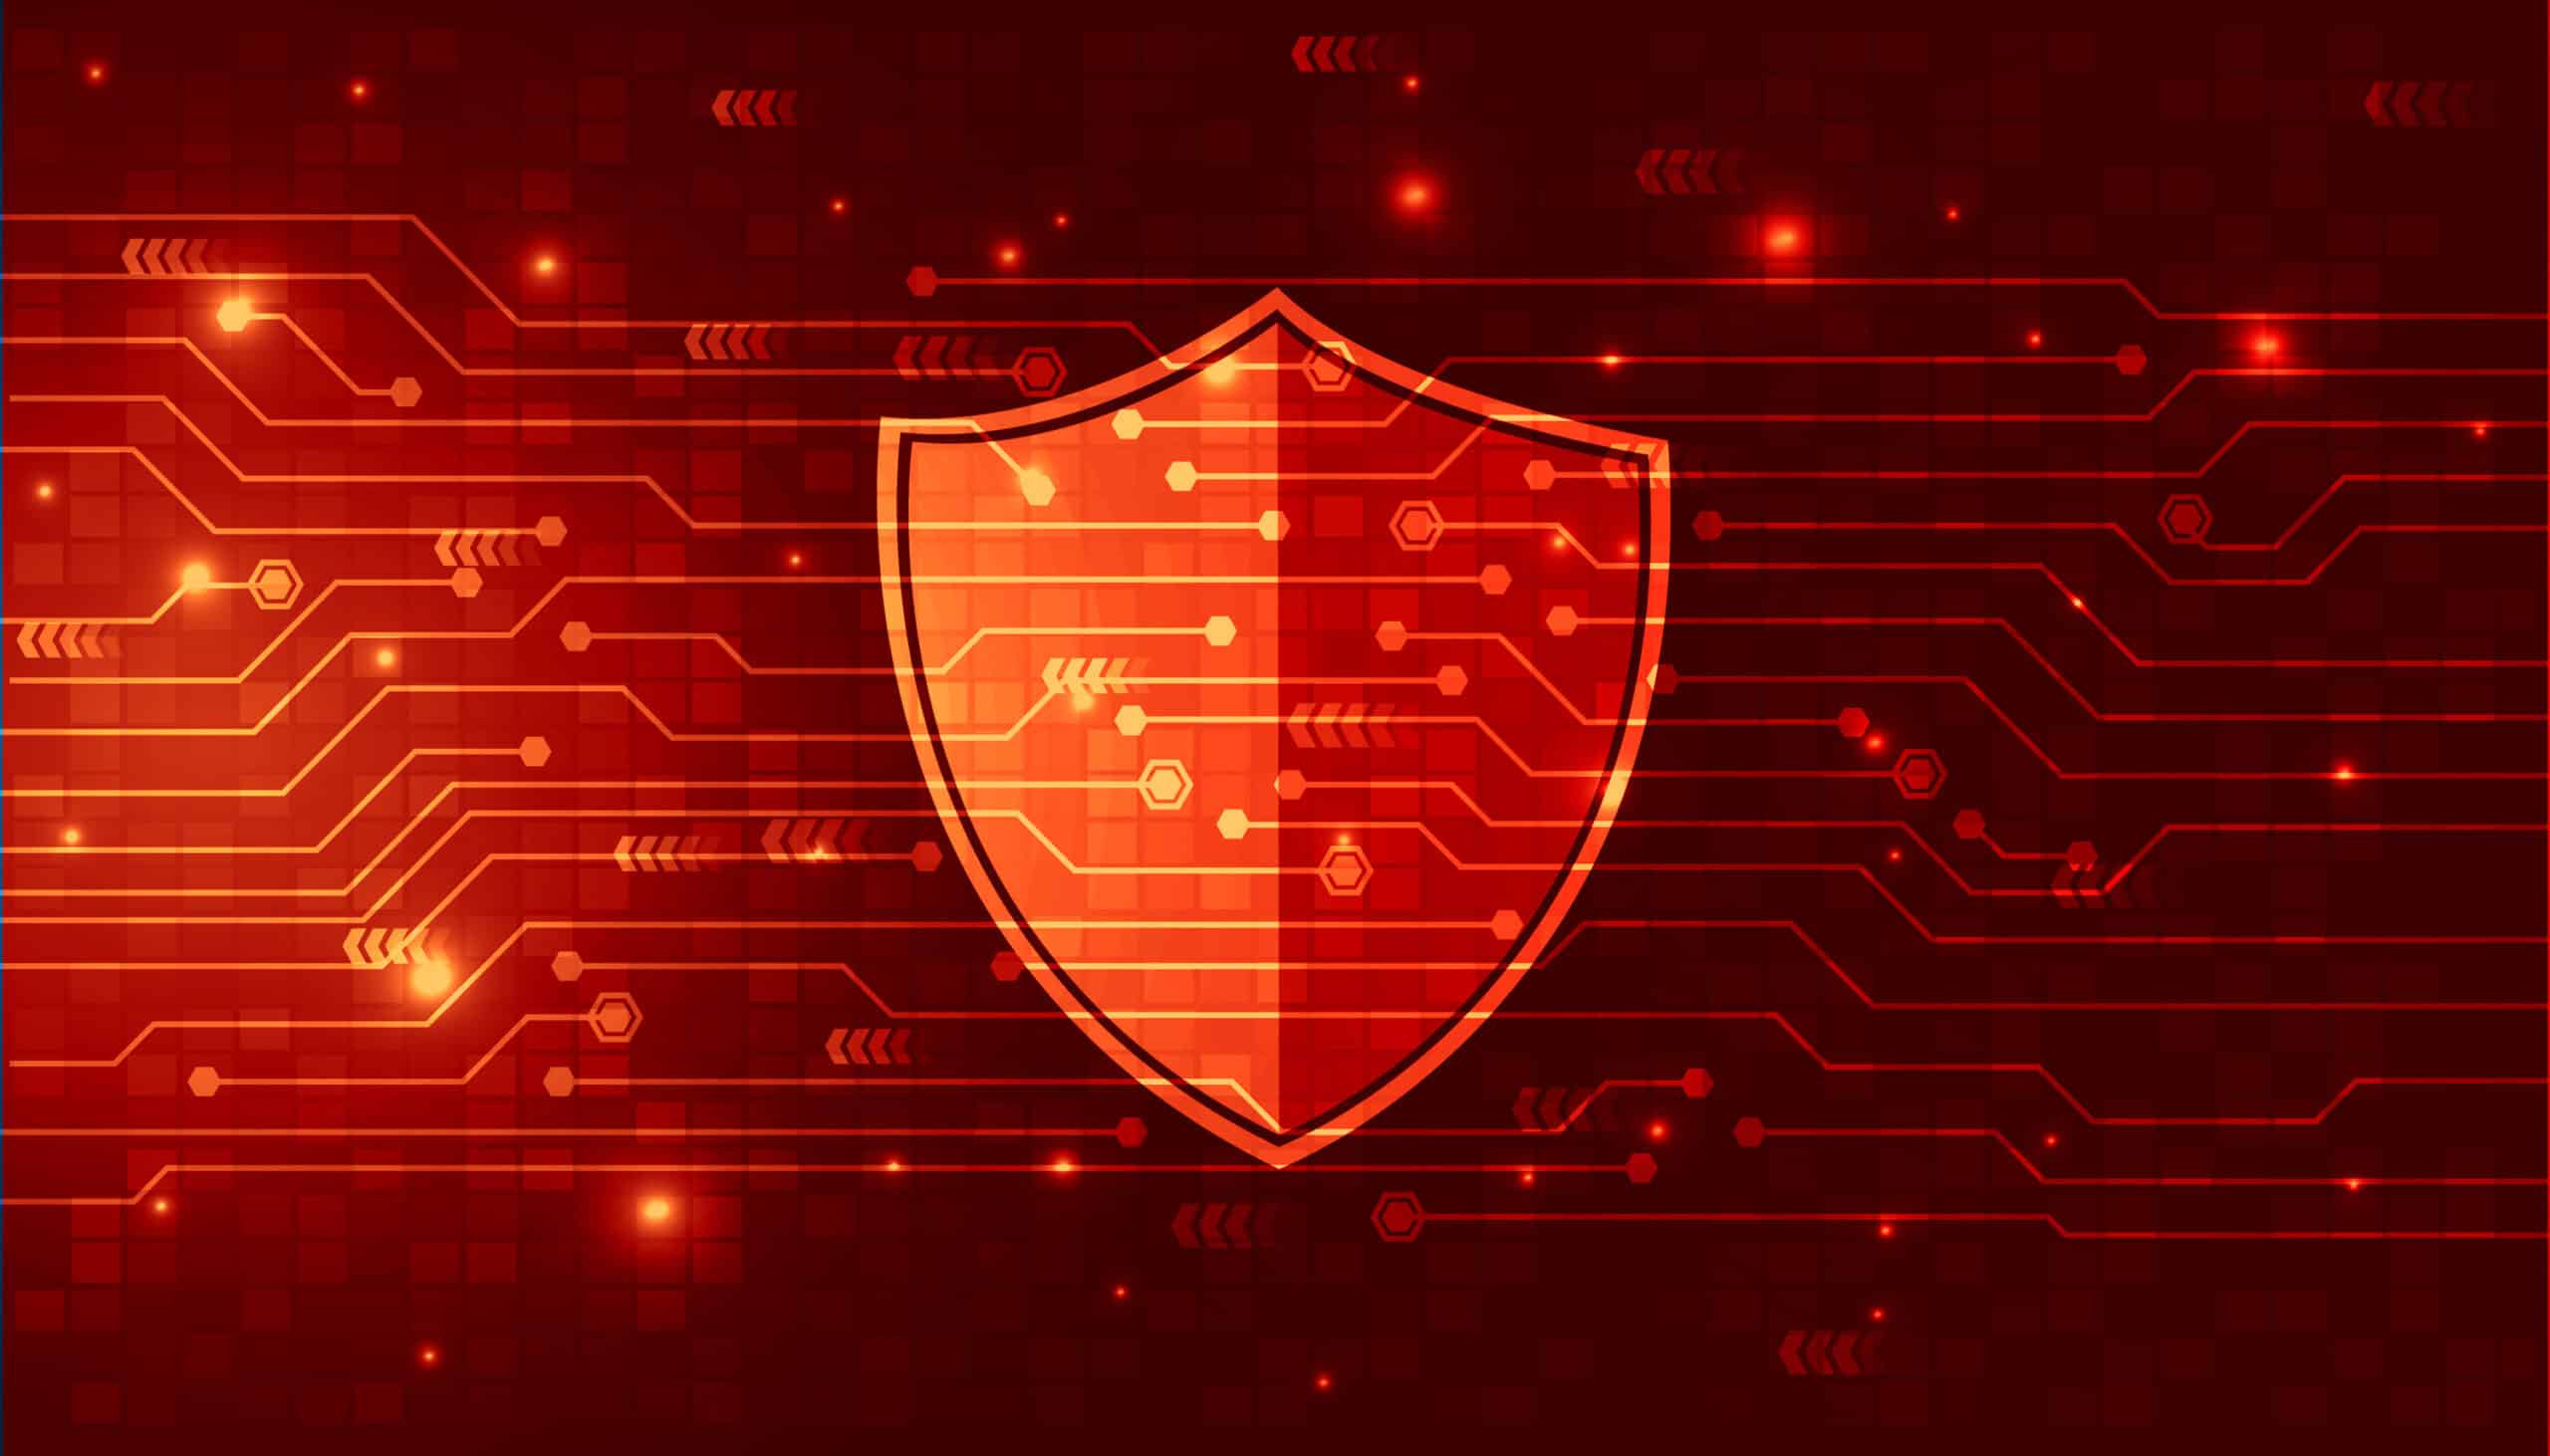 7 Important Network Security Best Practices You Should Be Following